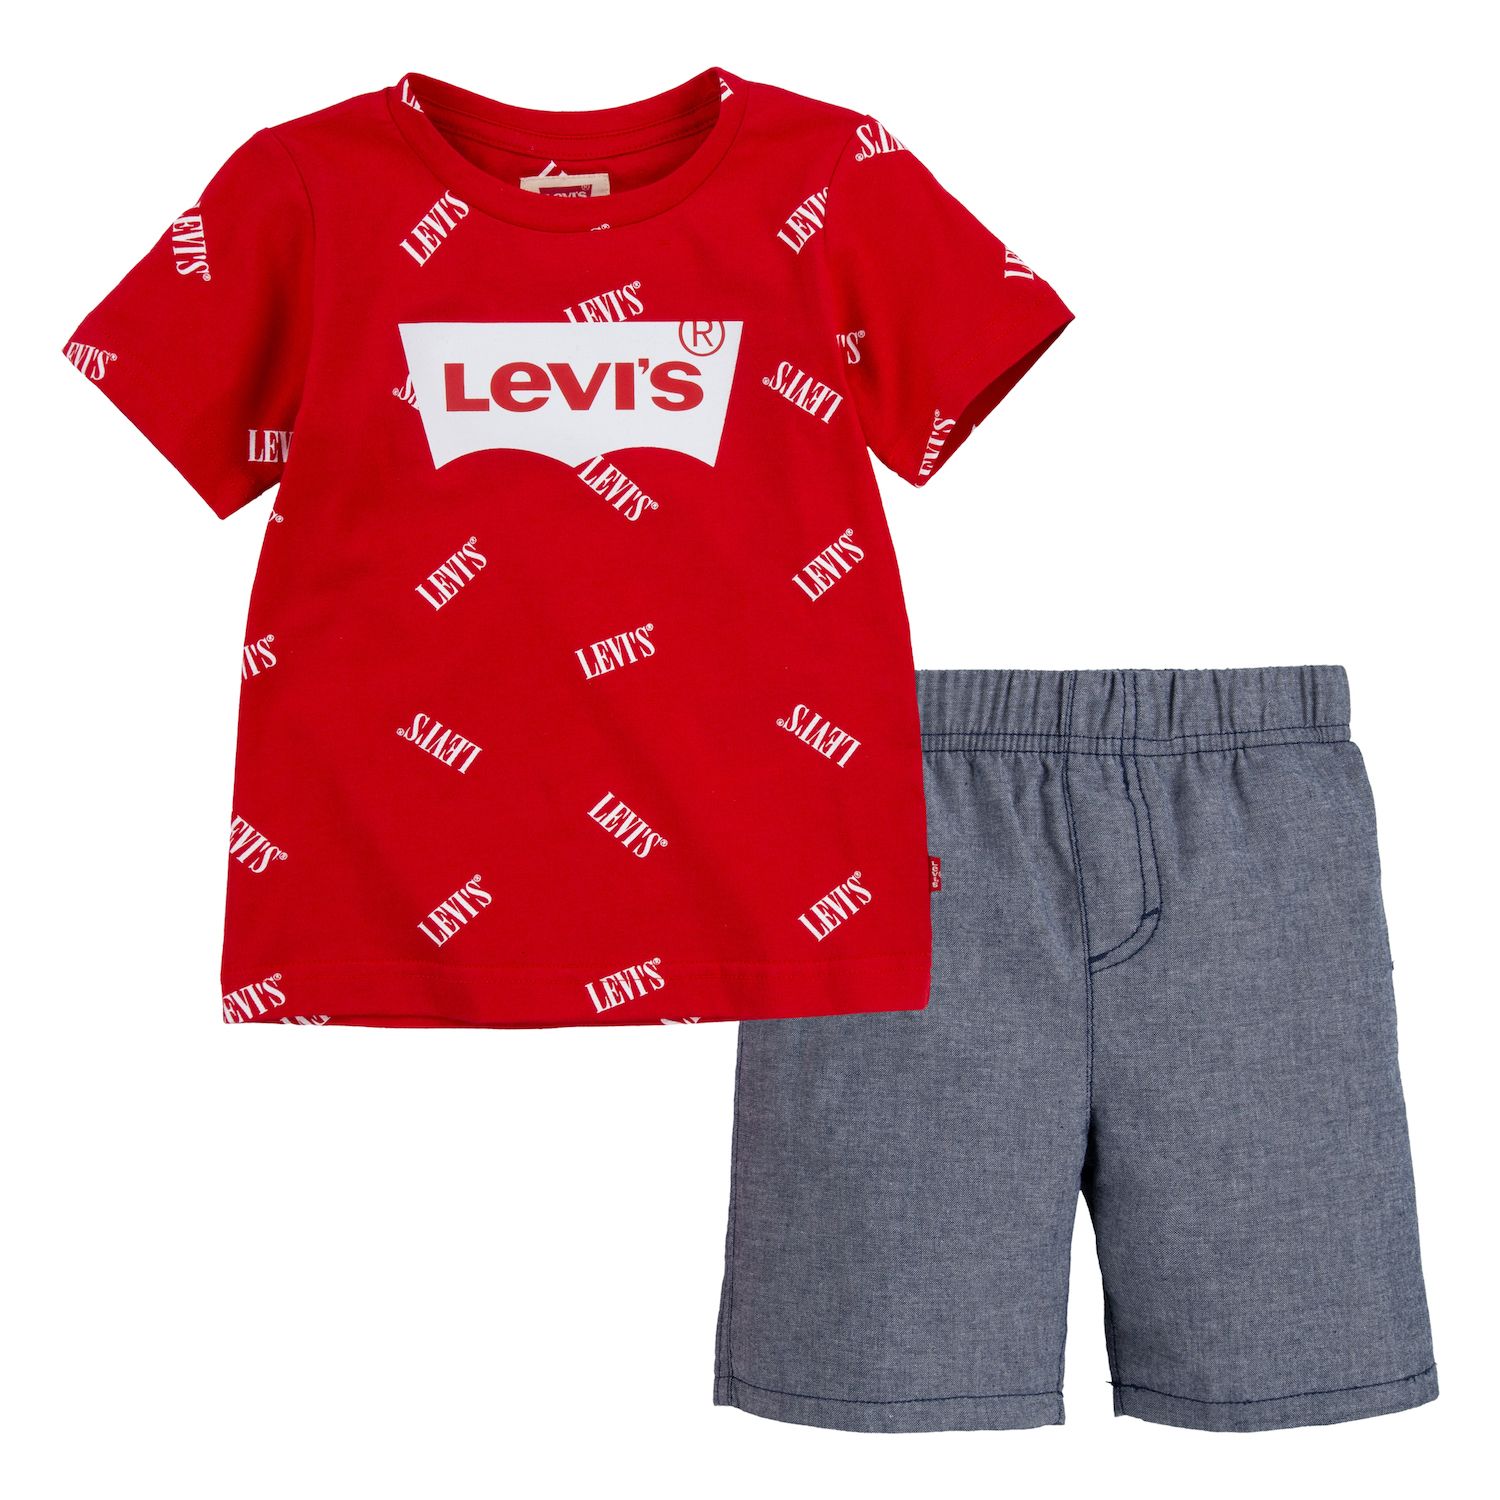 Image for Levi's Toddler Boy Tee & Pull-On Shorts Set at Kohl's.